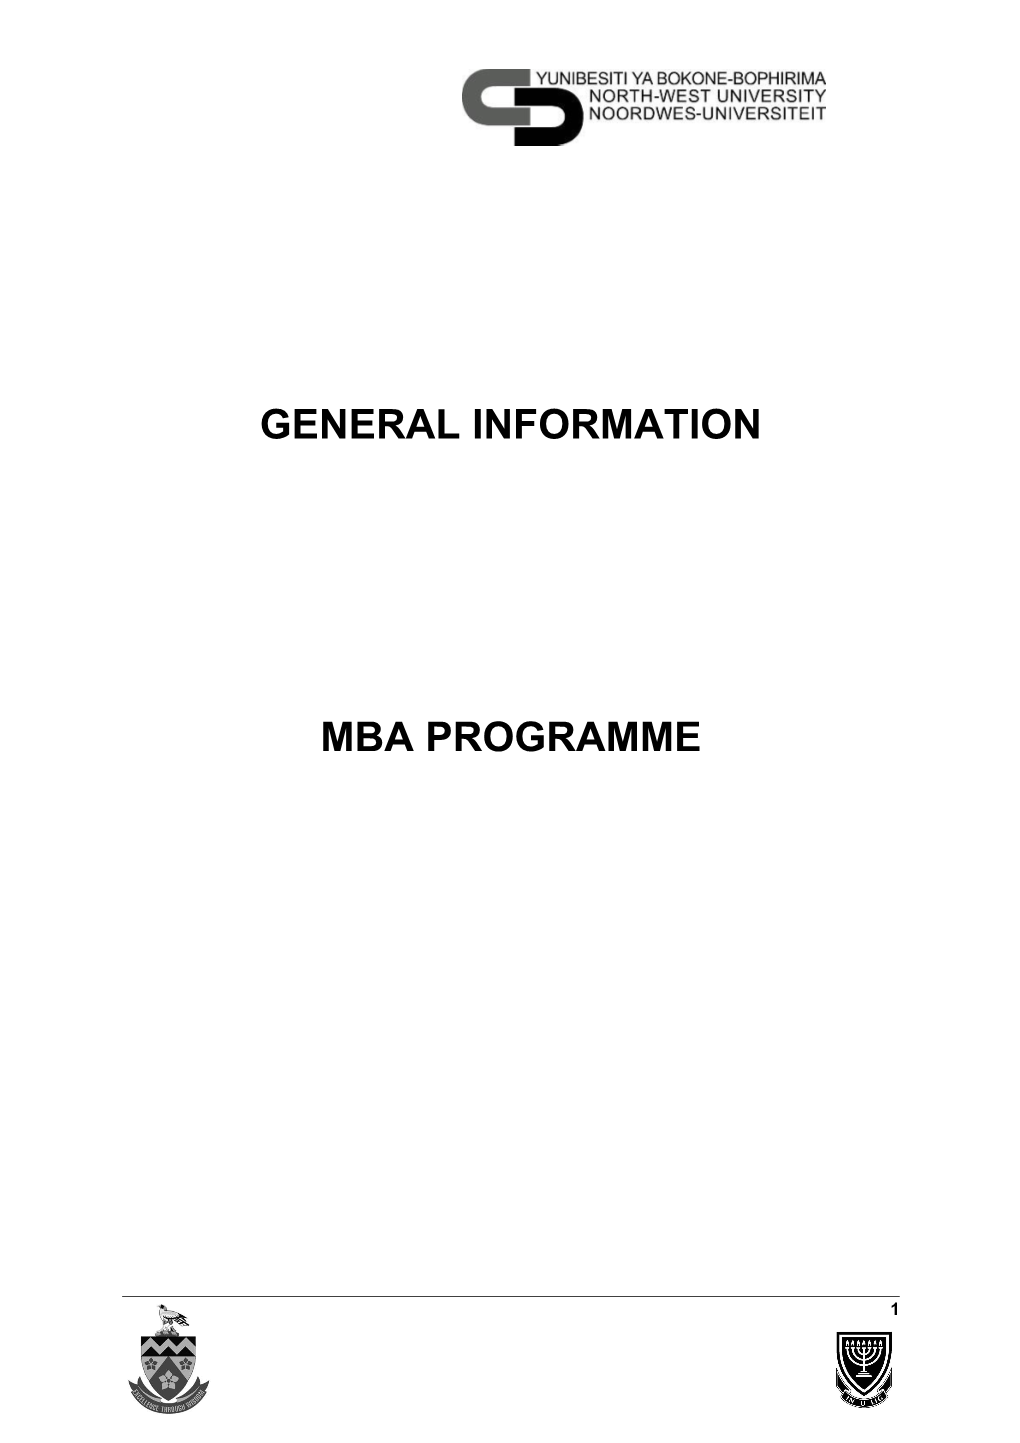 Masters Degree in Business Administration (Mba)